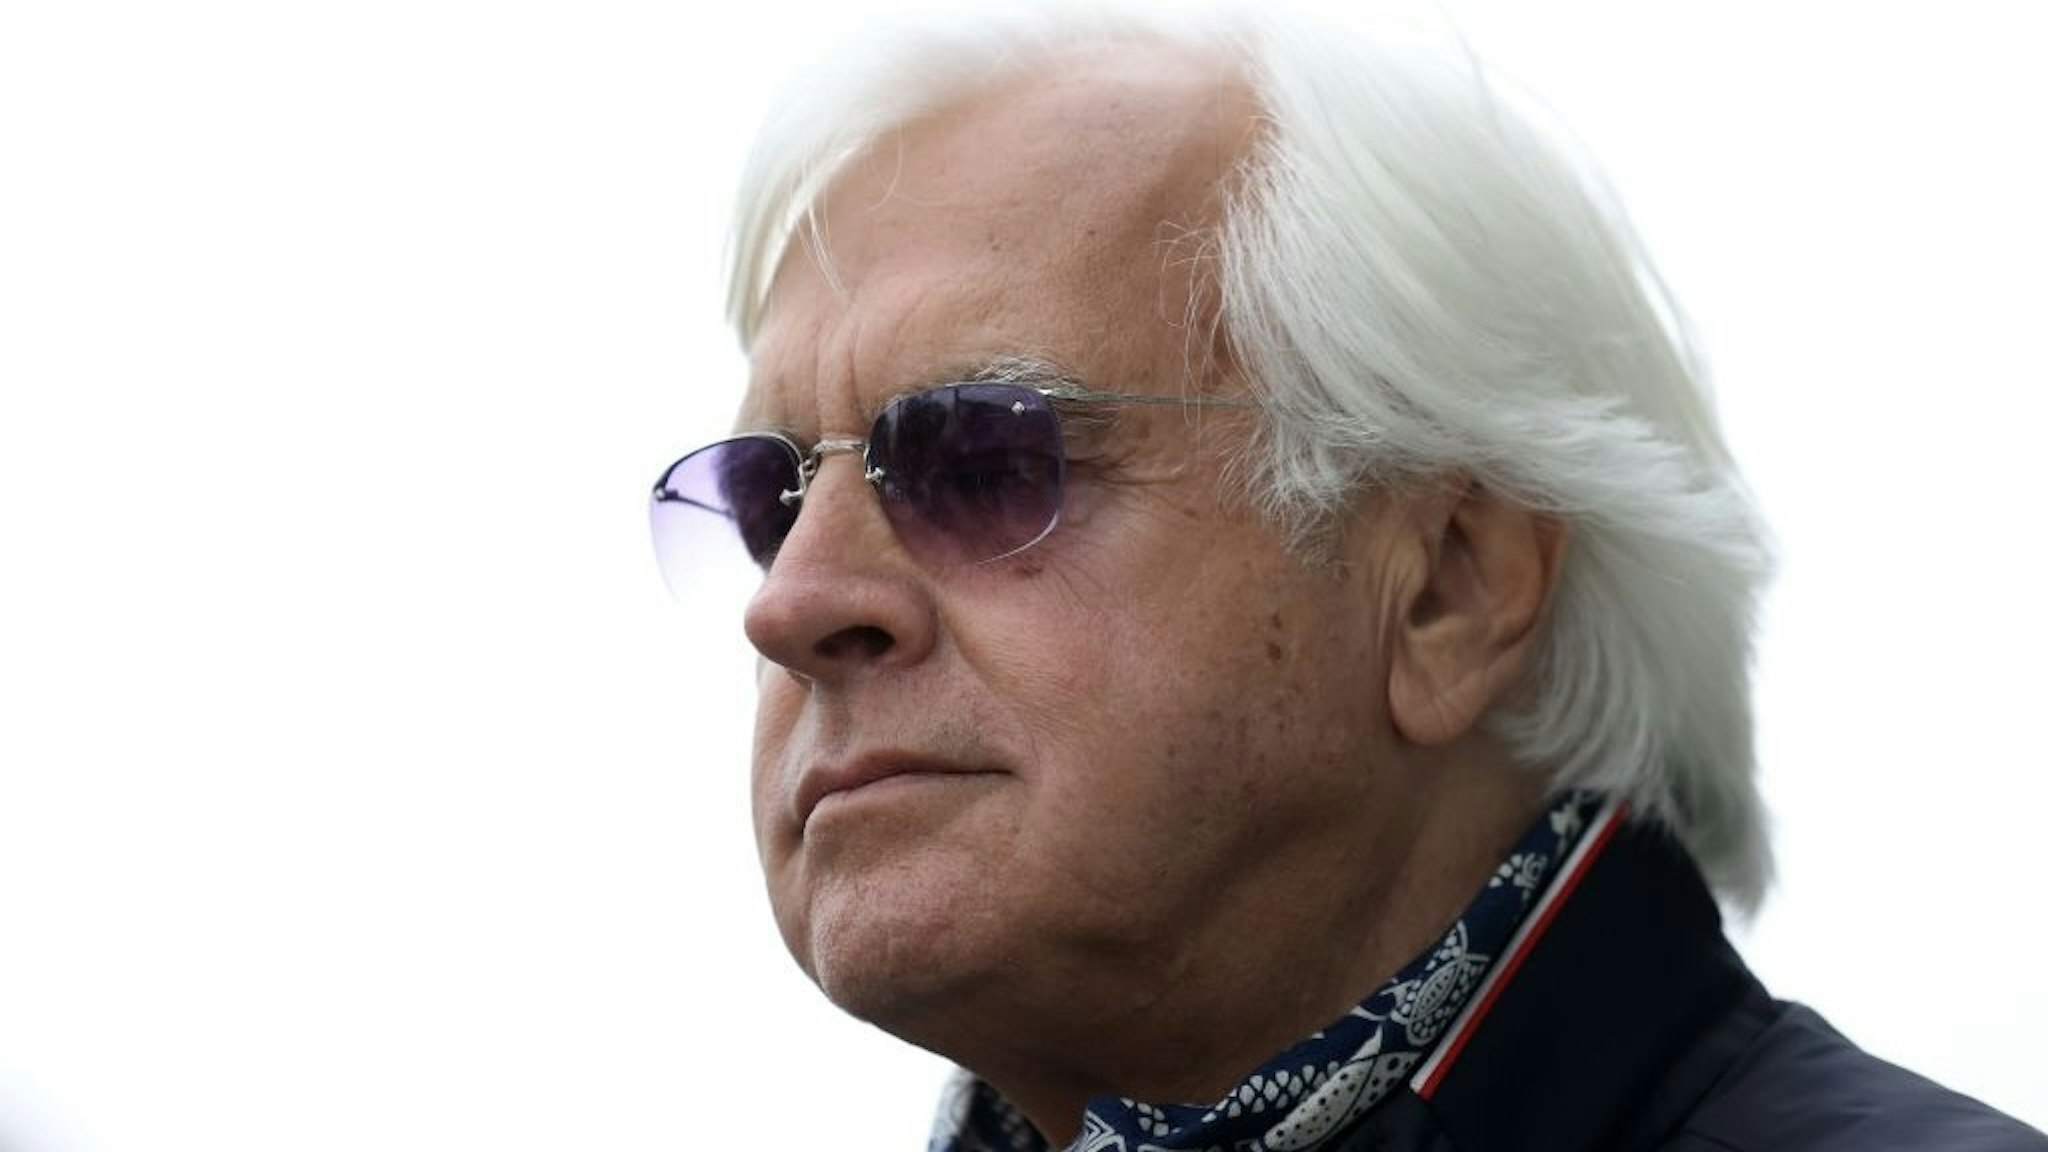 LOUISVILLE, KENTUCKY - APRIL 29: Bob Baffert the trainer of Medina Spirit talks to the media during the training for the Kentucky Derby at Churchill Downs on April 29, 2021 in Louisville, Kentucky. (Photo by Andy Lyons/Getty Images)